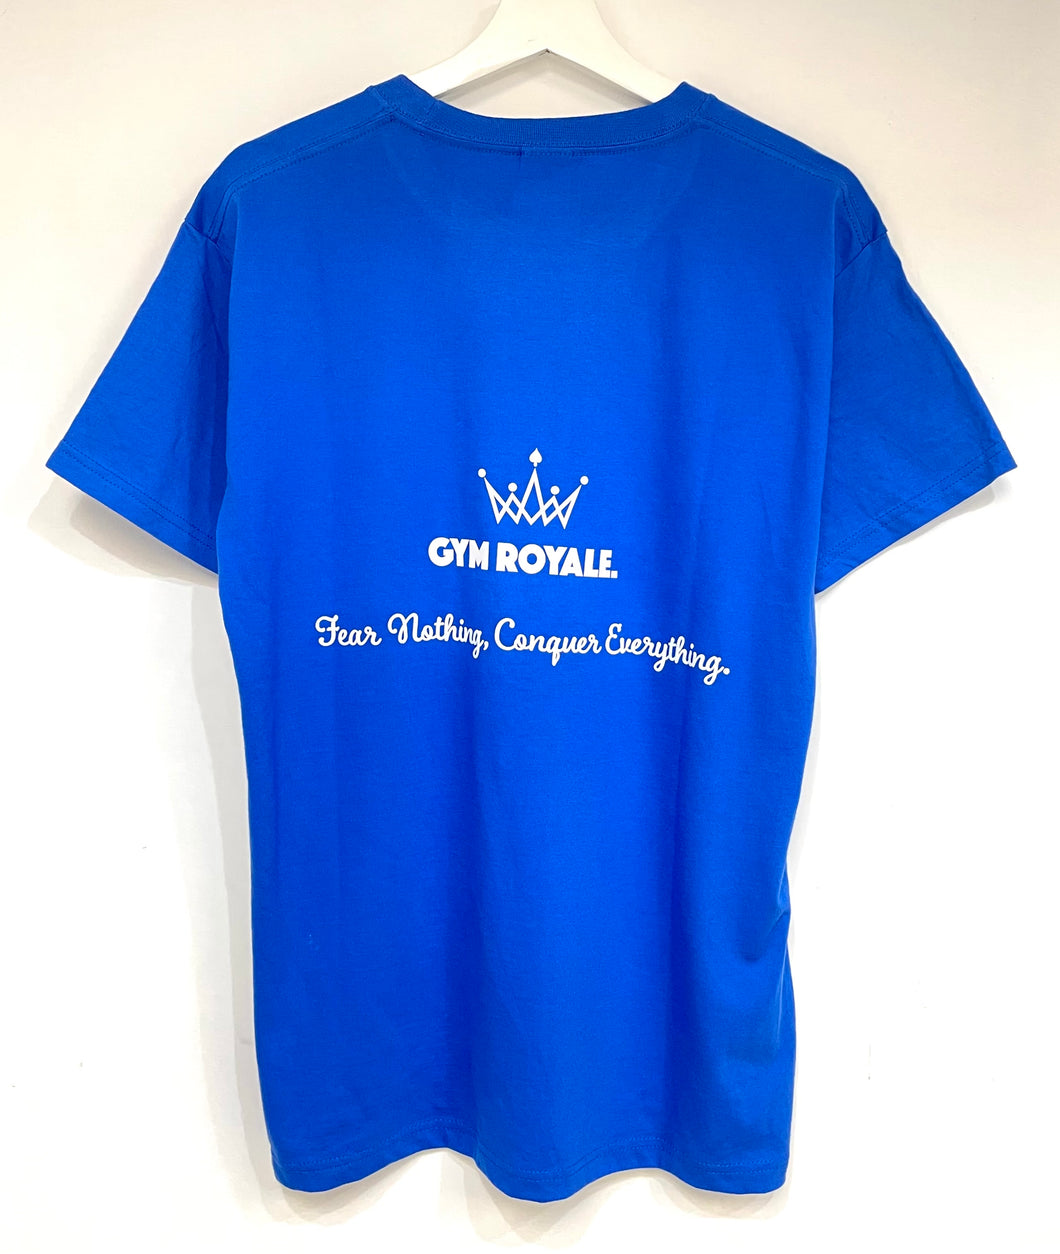 Gym Royale® Conquer Everything - T-shirt - White on Blue